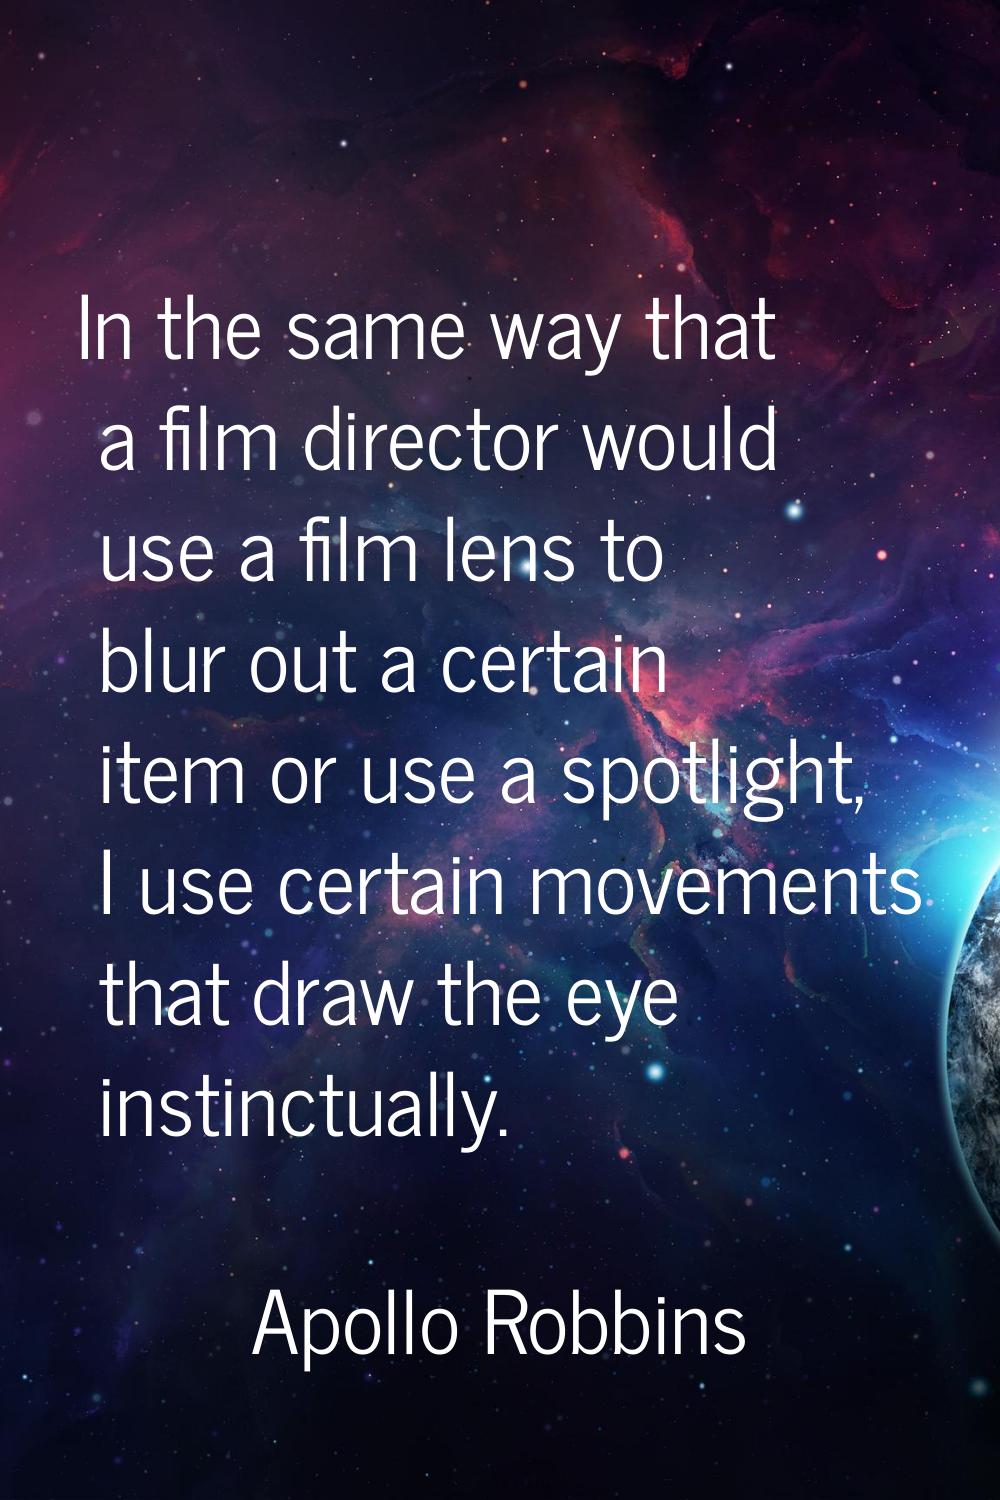 In the same way that a film director would use a film lens to blur out a certain item or use a spot